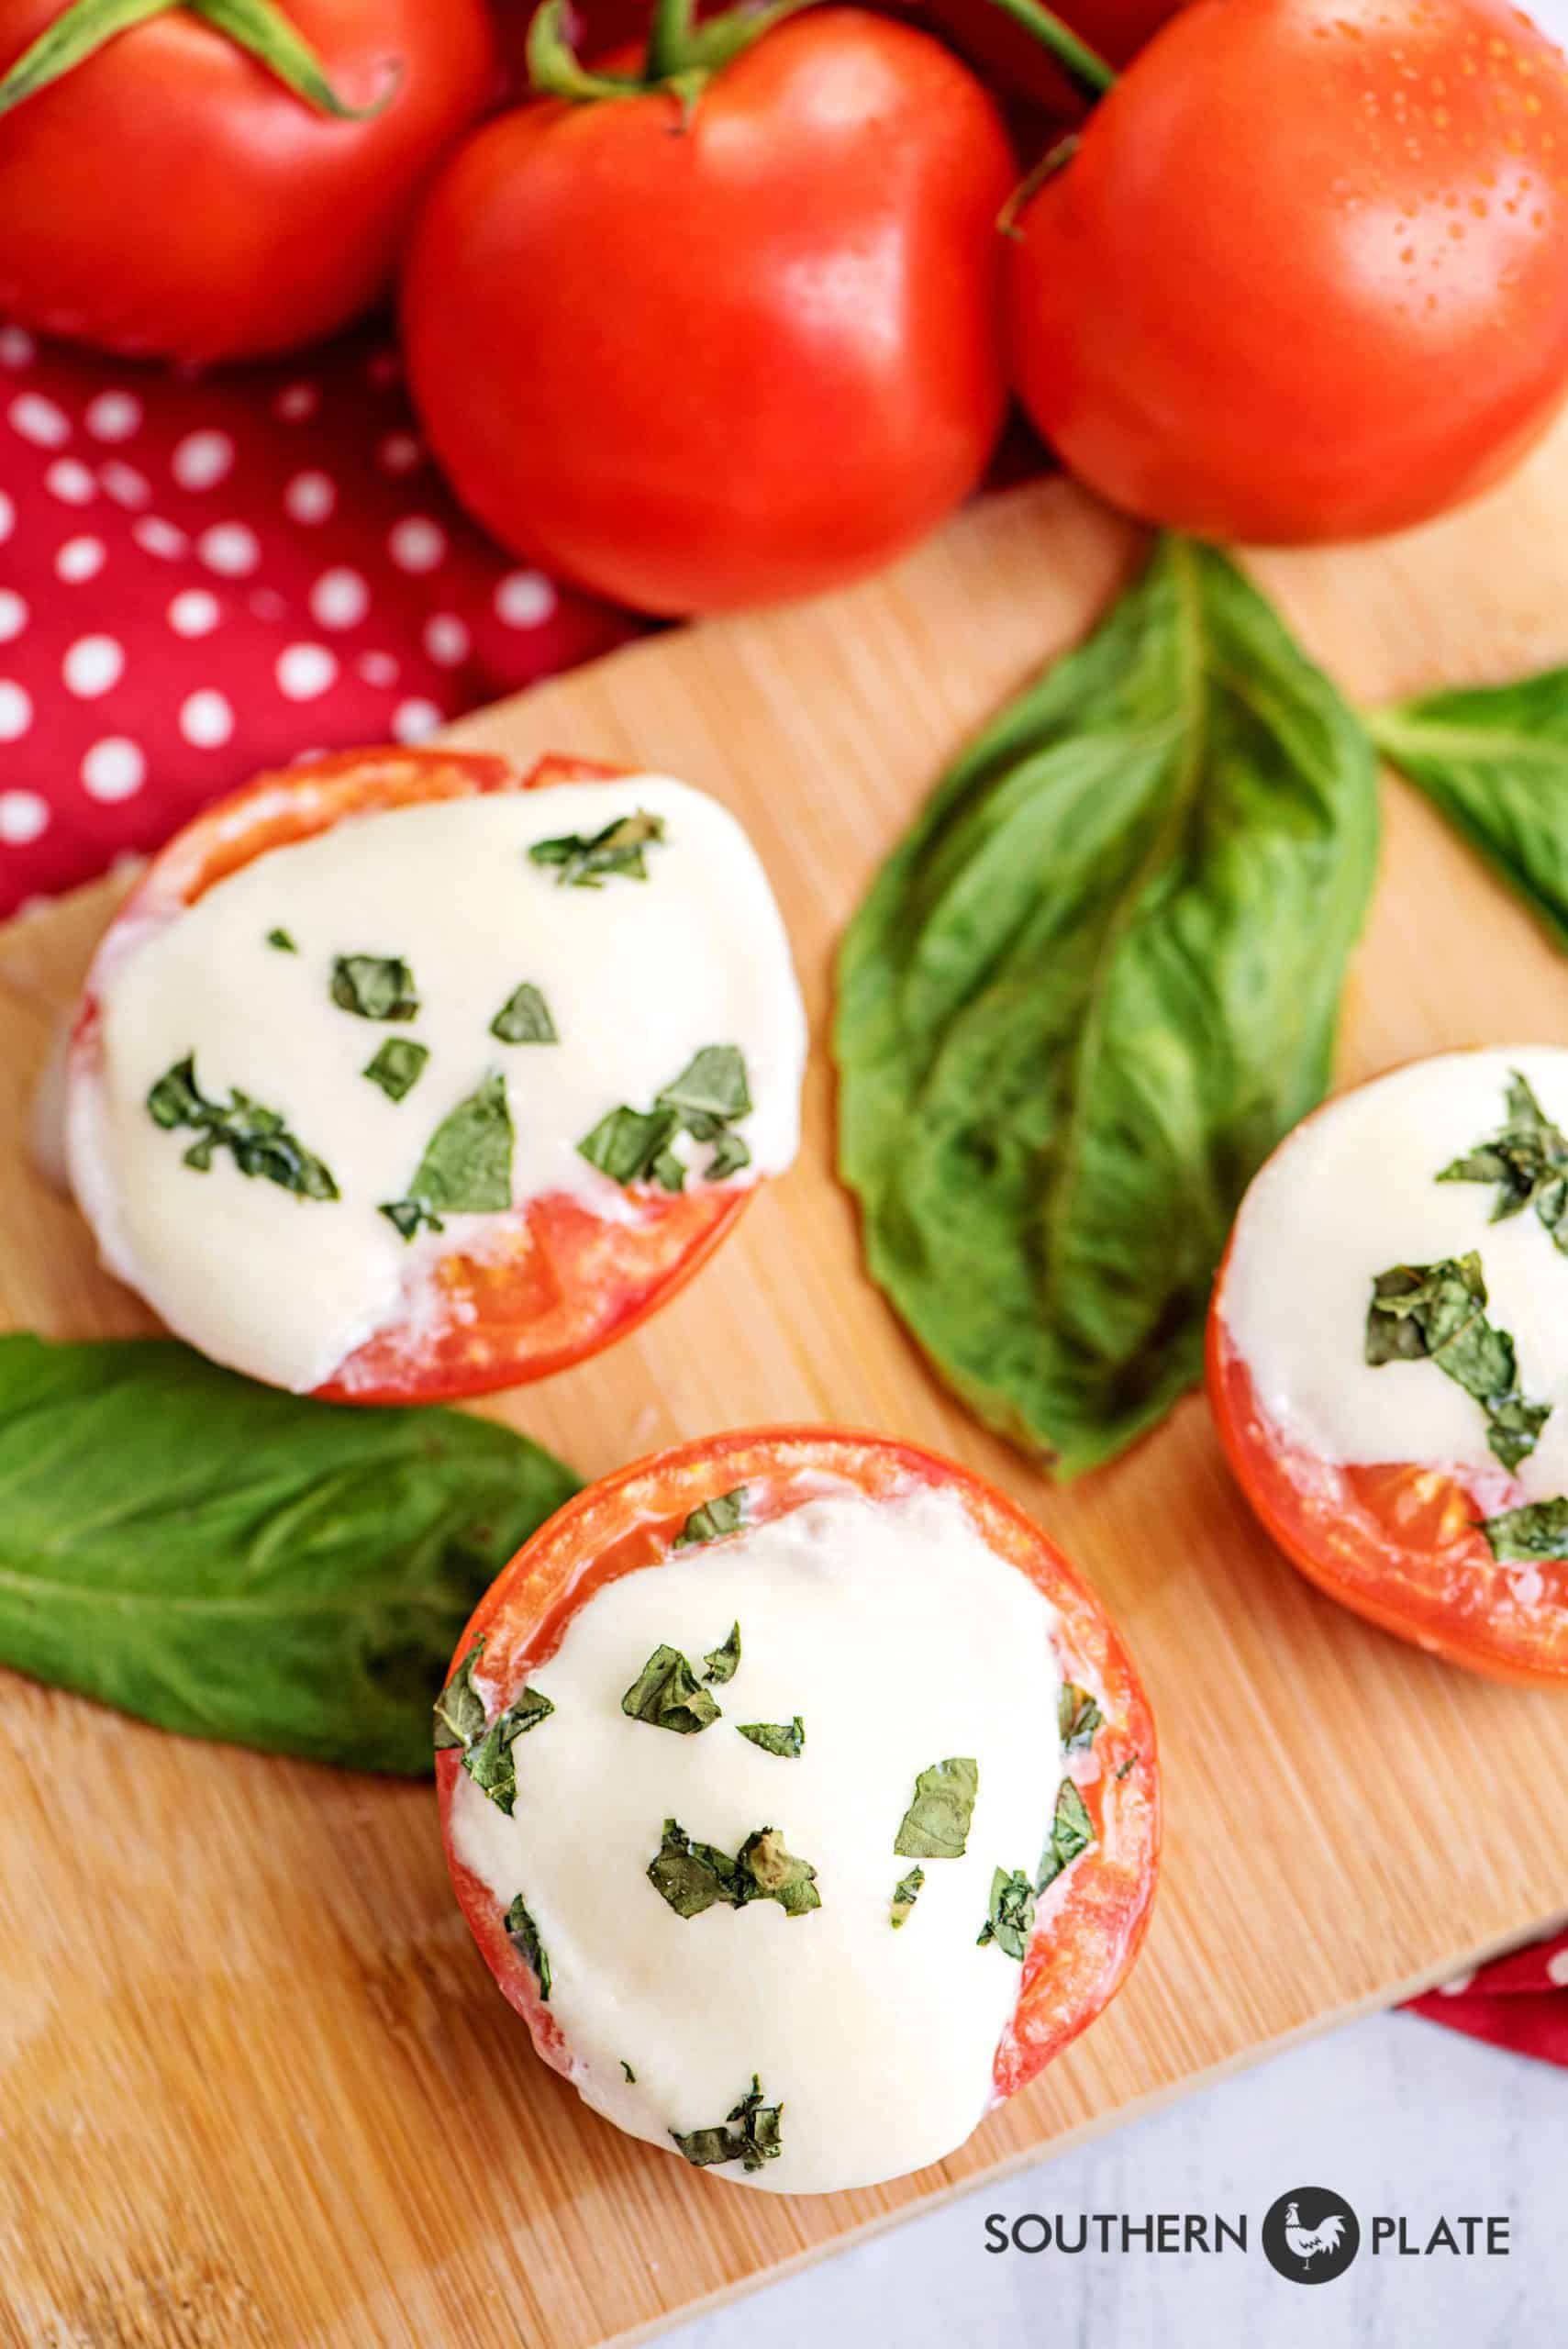 Baked Tomatoes With Mozzarella and Basil